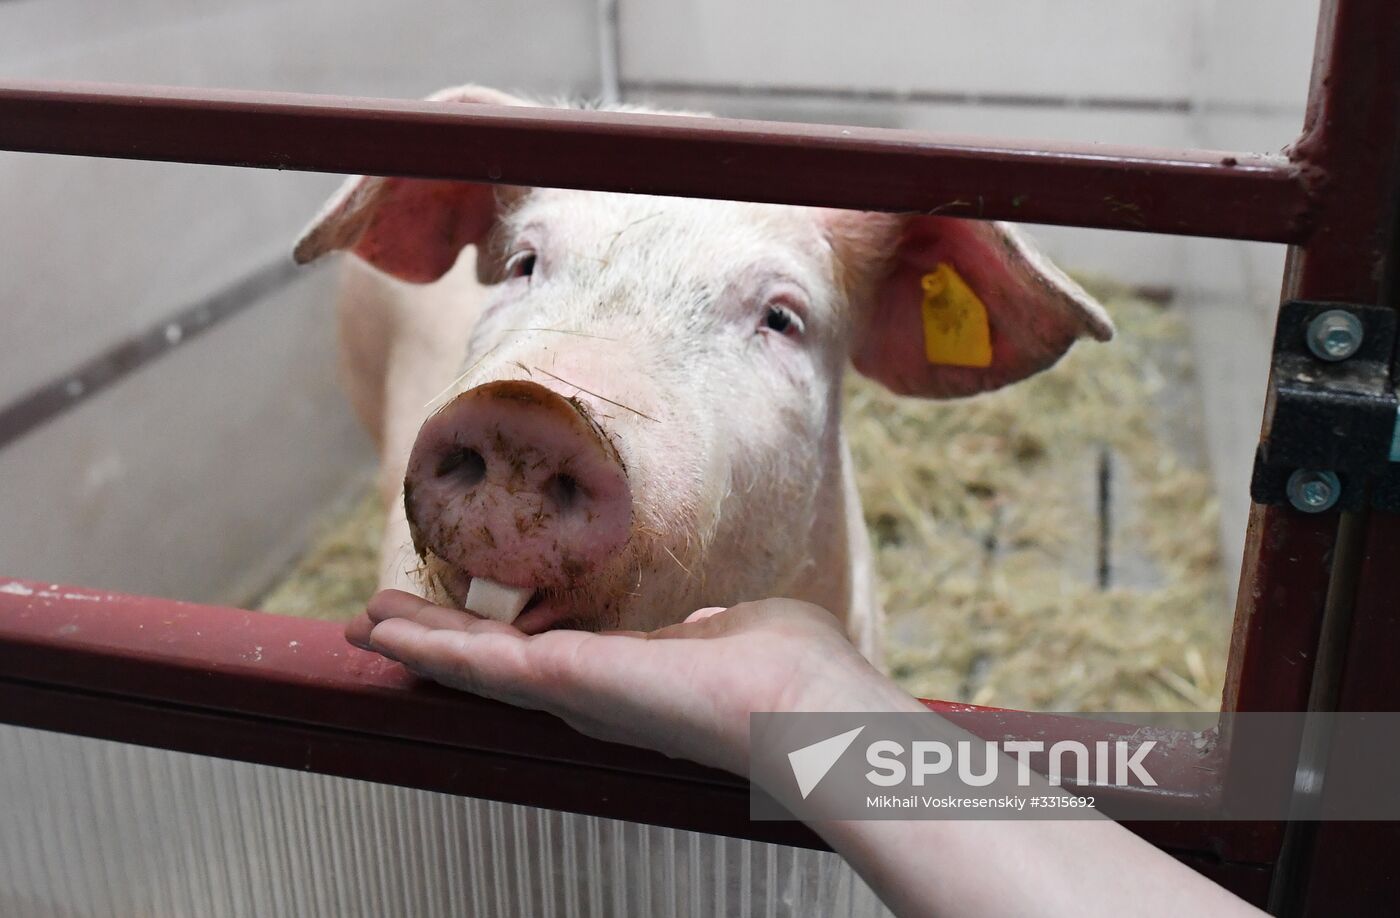 Russian surgical robot performs test surgery on swine in Penza